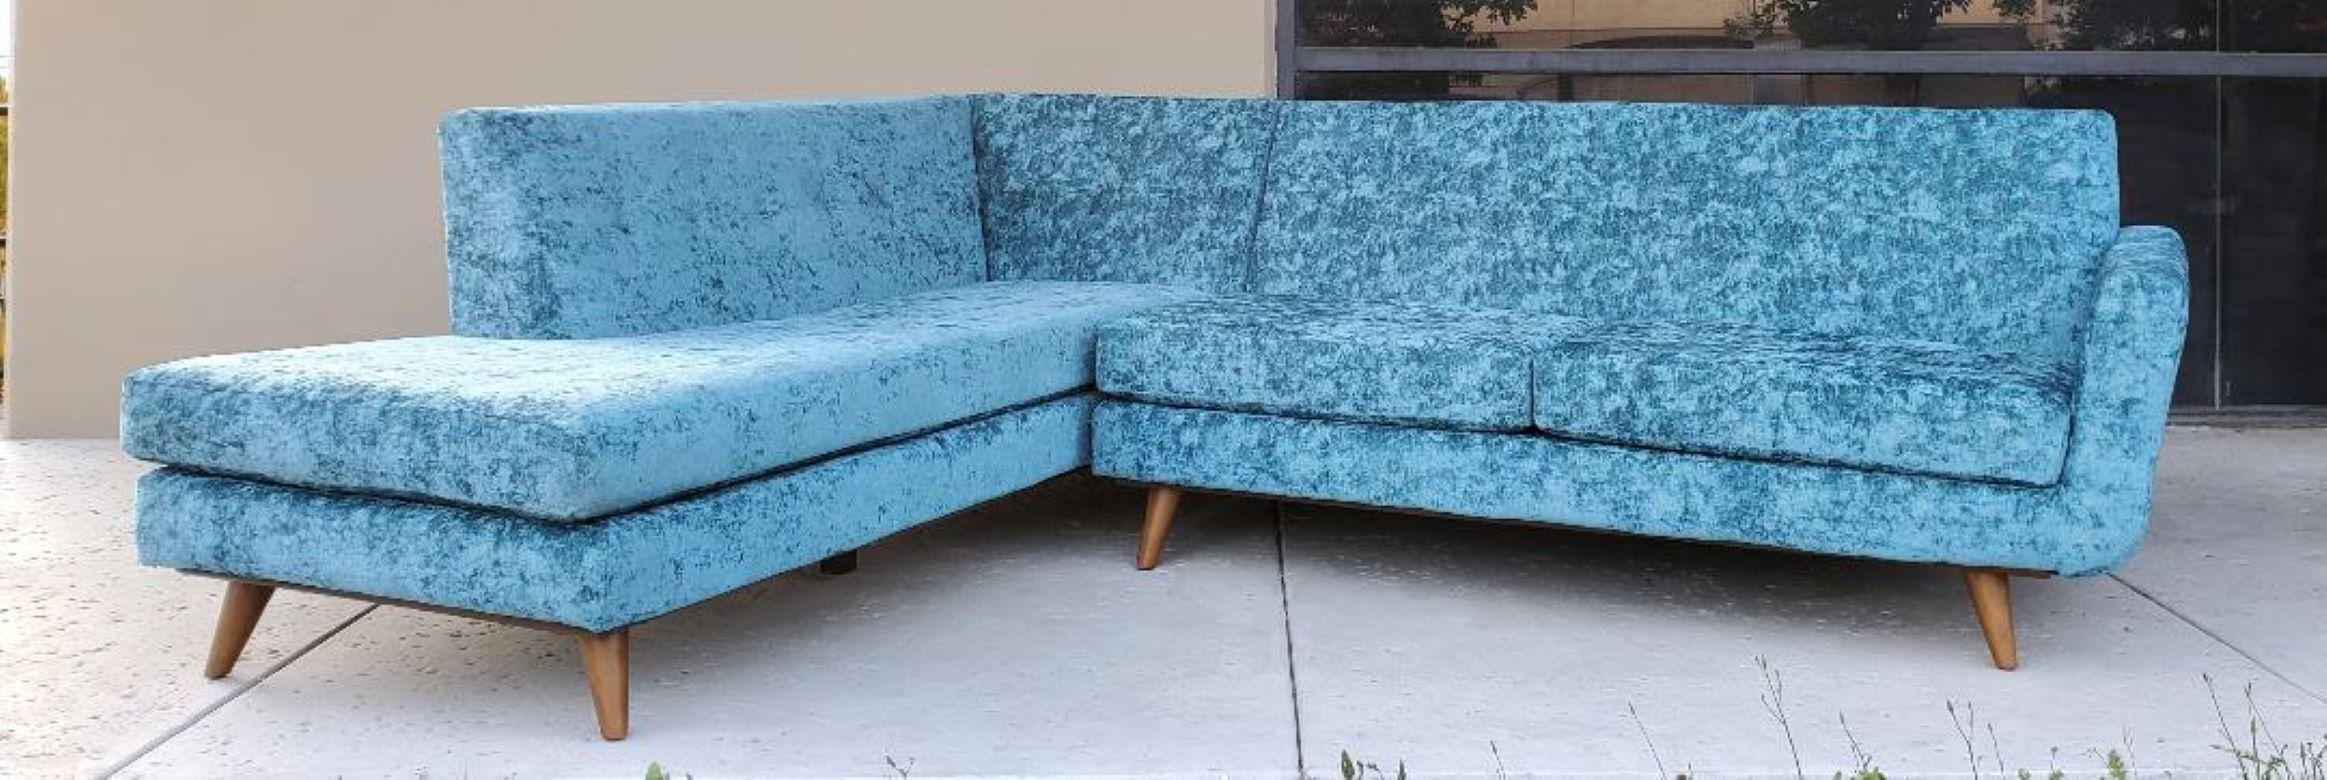 60s Low Slung Style Sectional Tapered Legs Aqua Green Crushed Velvet Upholstery For Sale 5